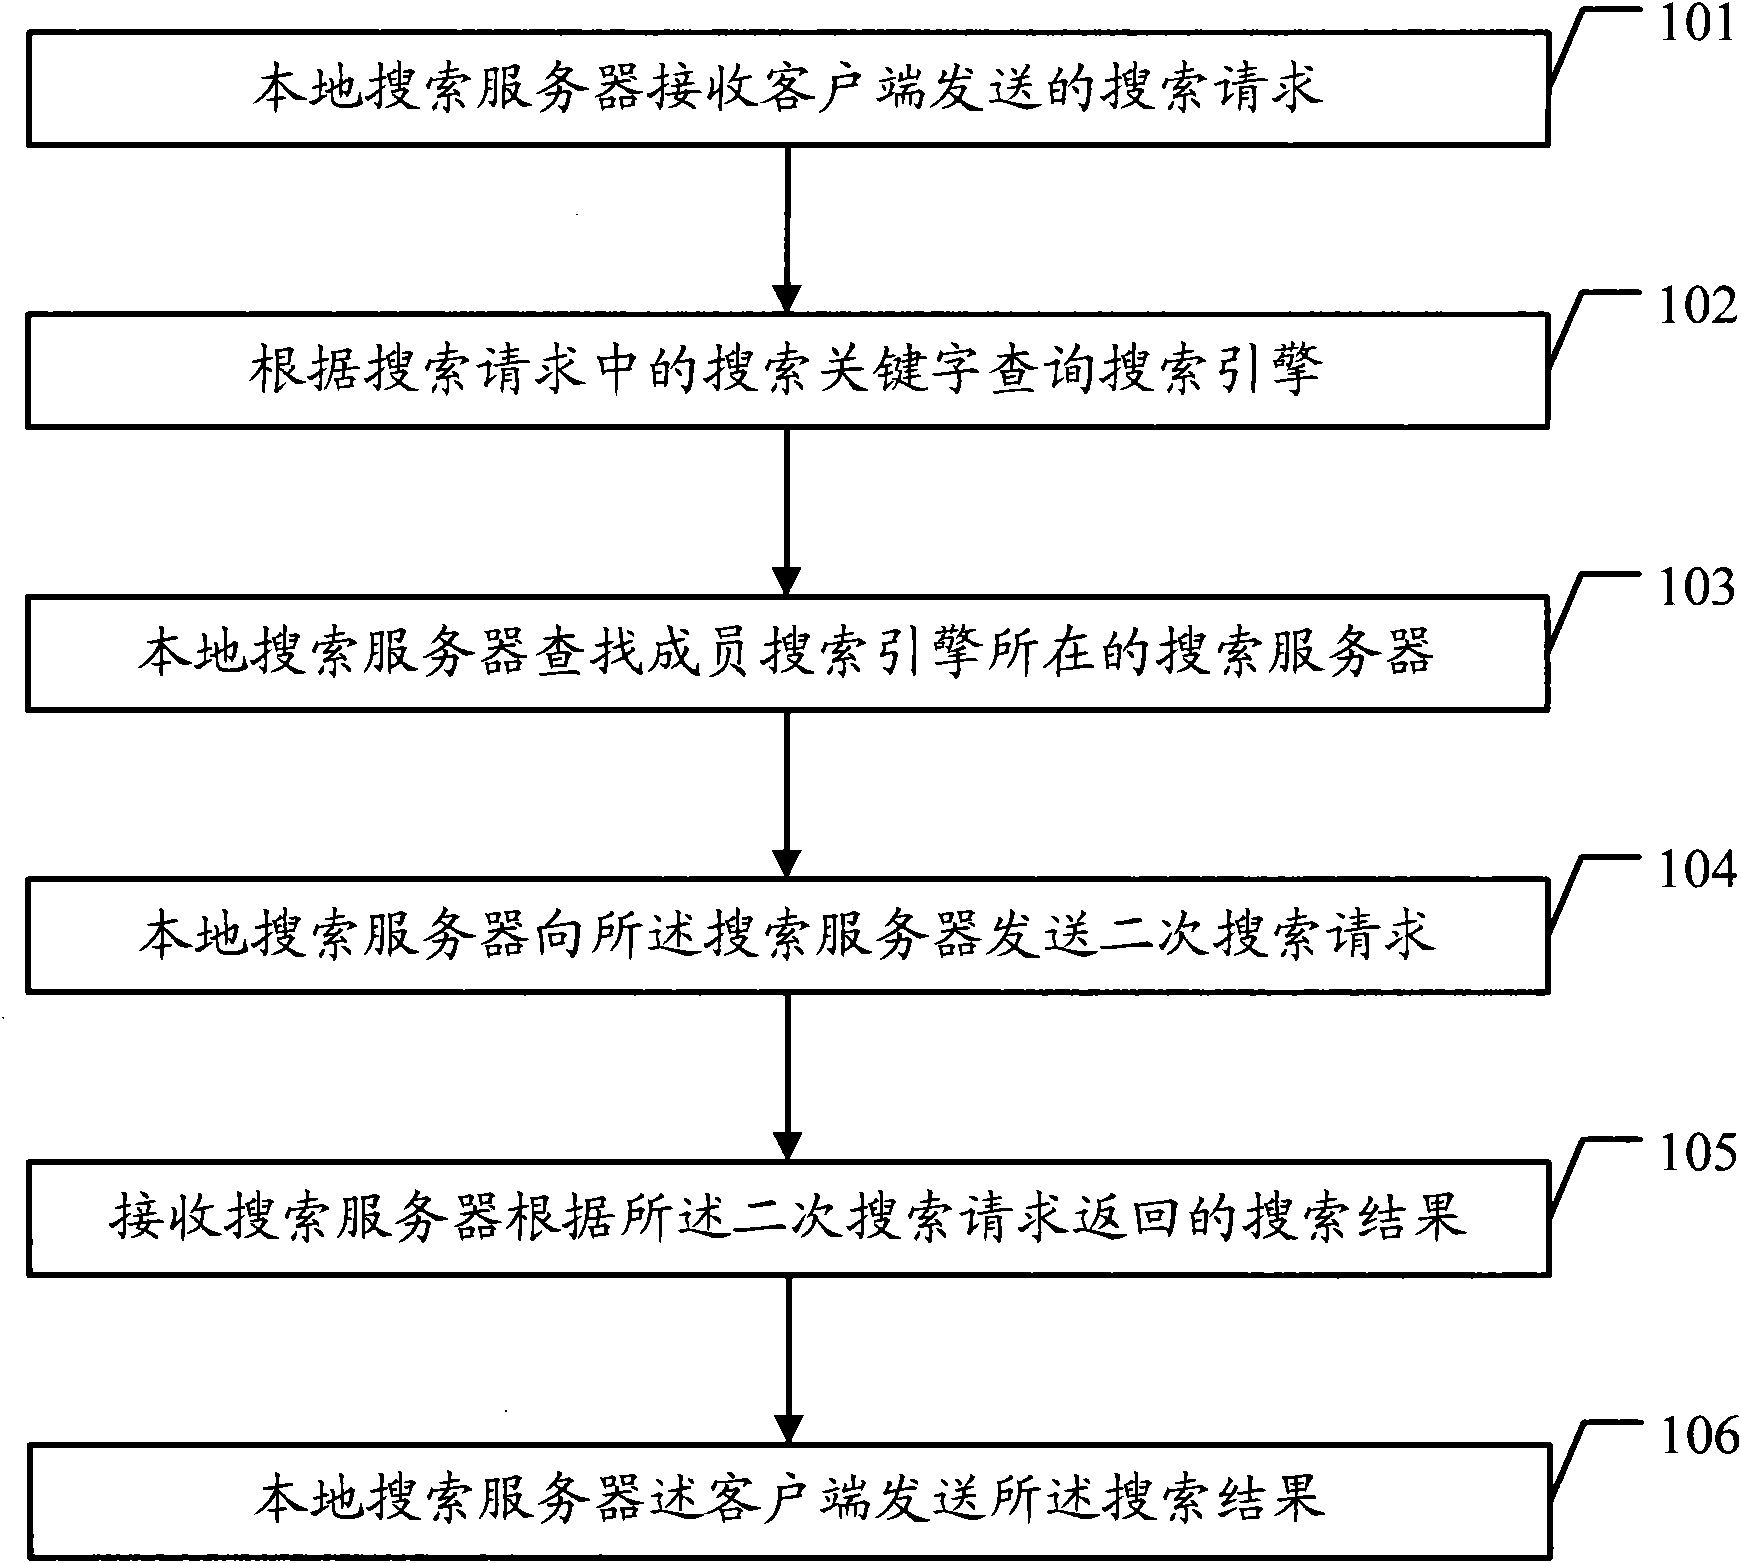 Mobile search method and system, and method for synchronizing search capability of search server